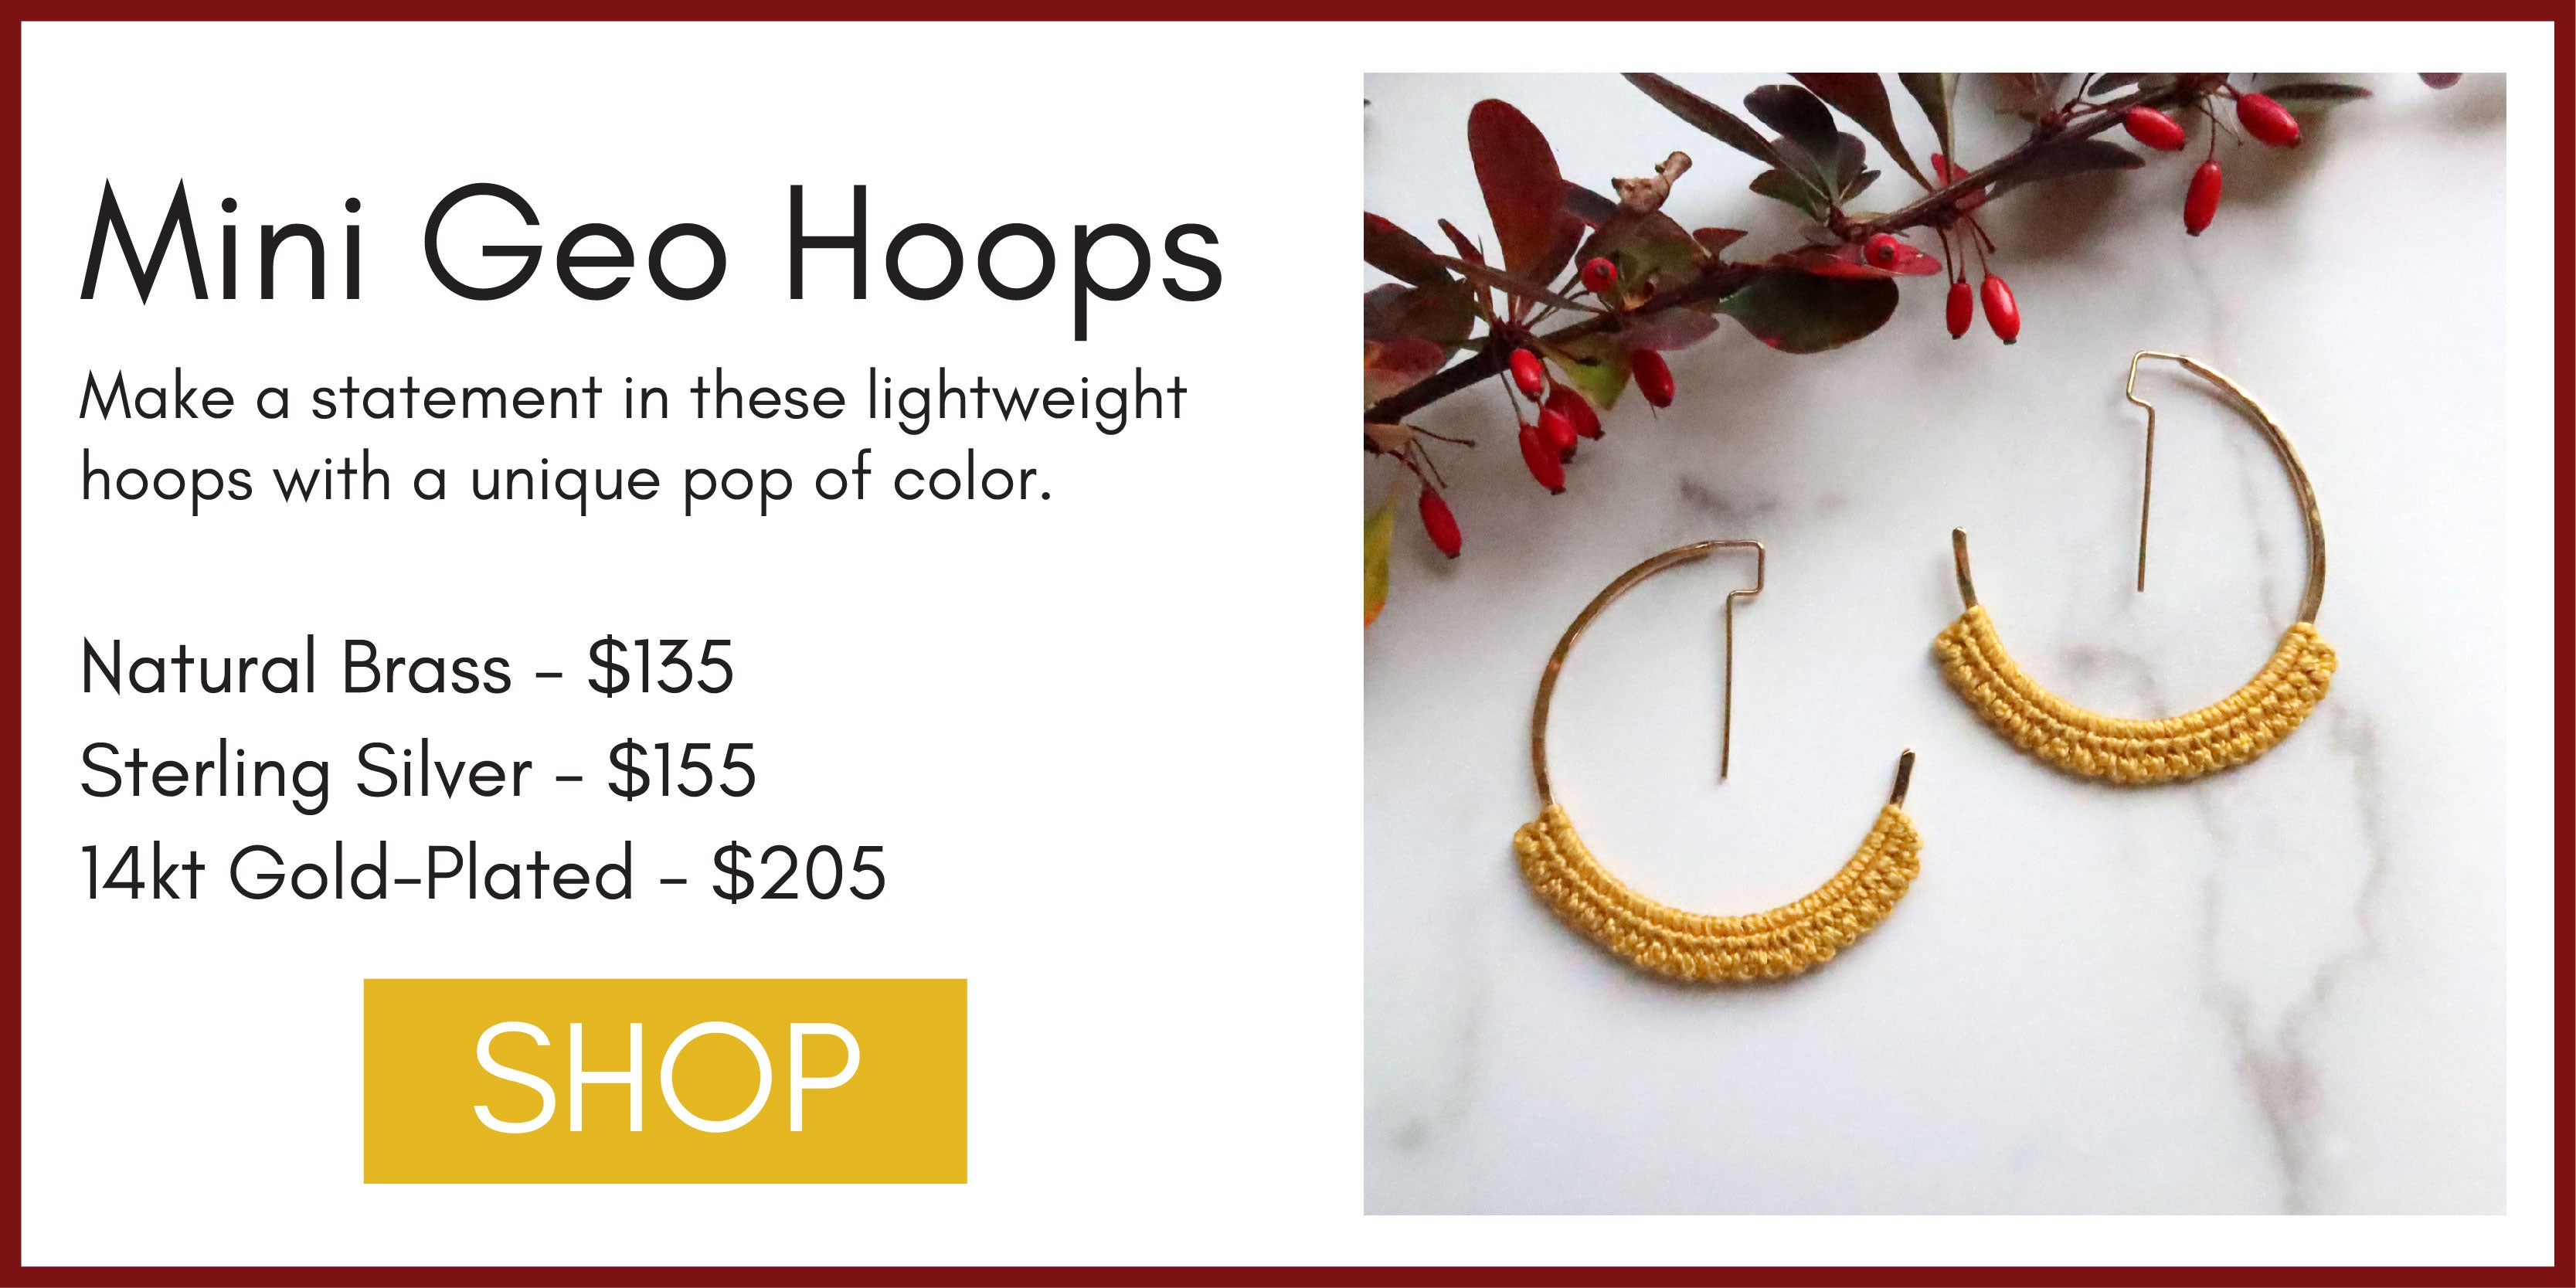 Graphic with title "Mini Geo Hoops" and an image that shows the Mini Geo Hoops in Mustard with holiday greenery in the background